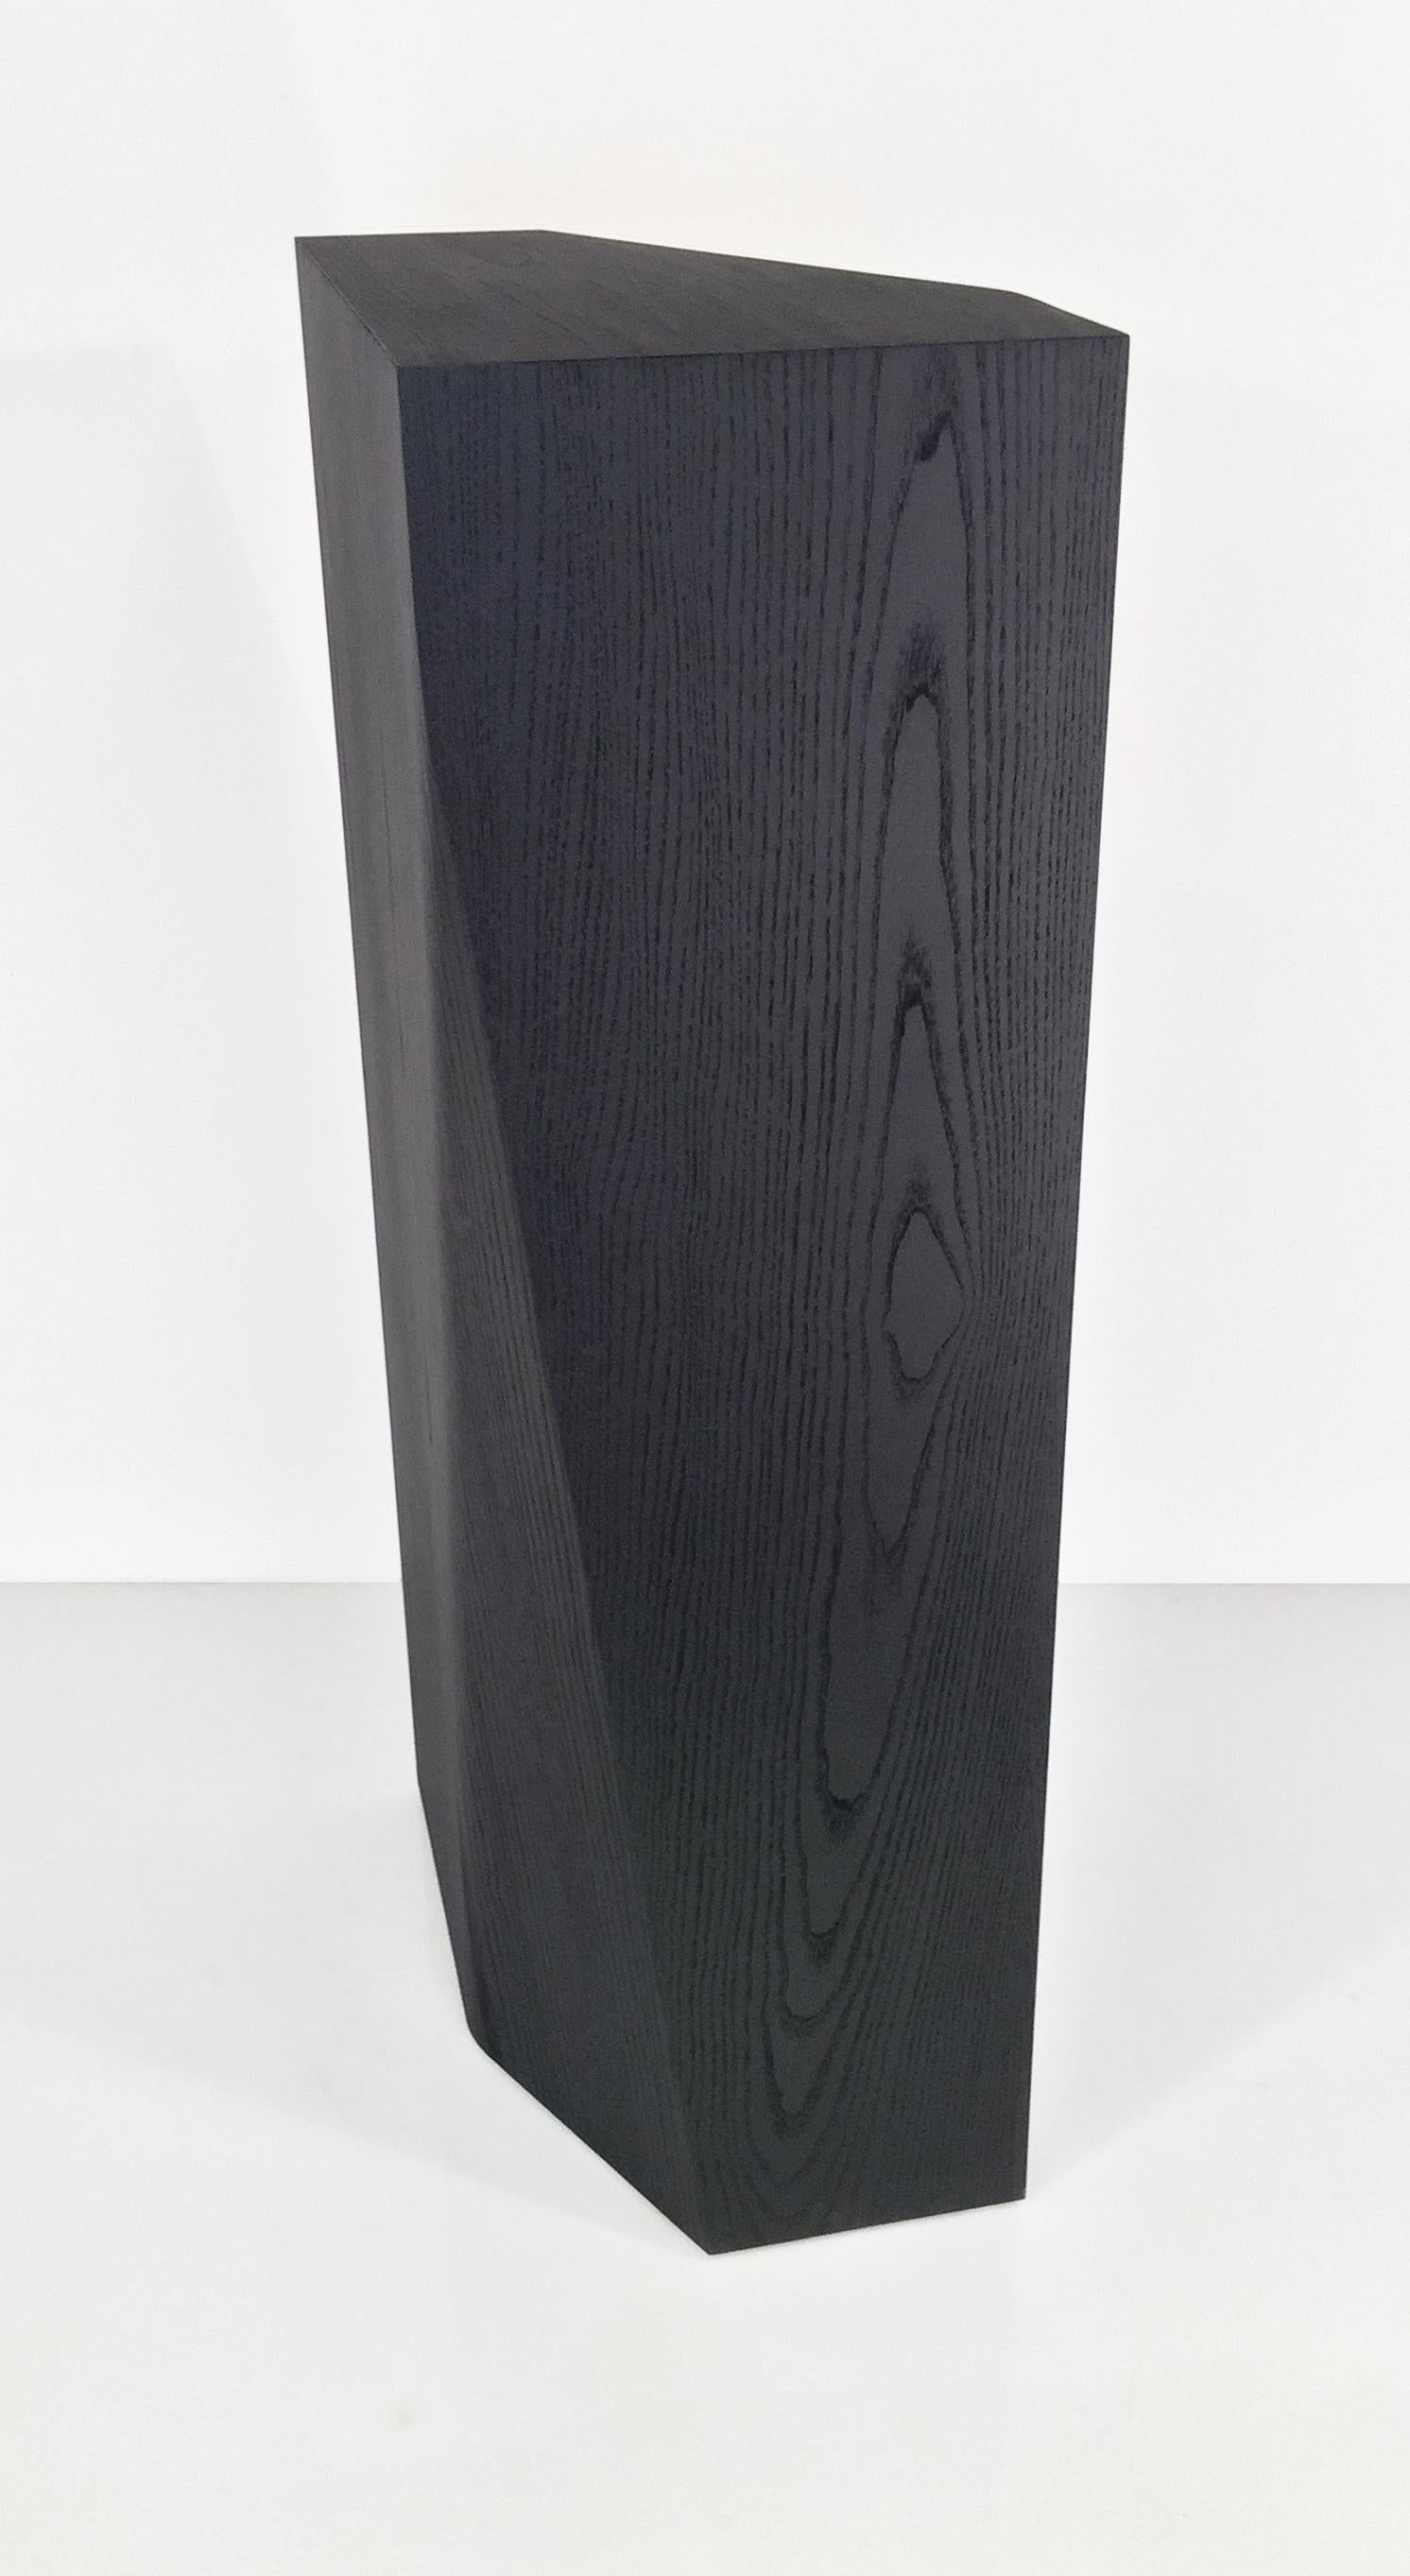 Contemporary 'scarecrow' william earle's modernist pedestal still made by hand by the artist